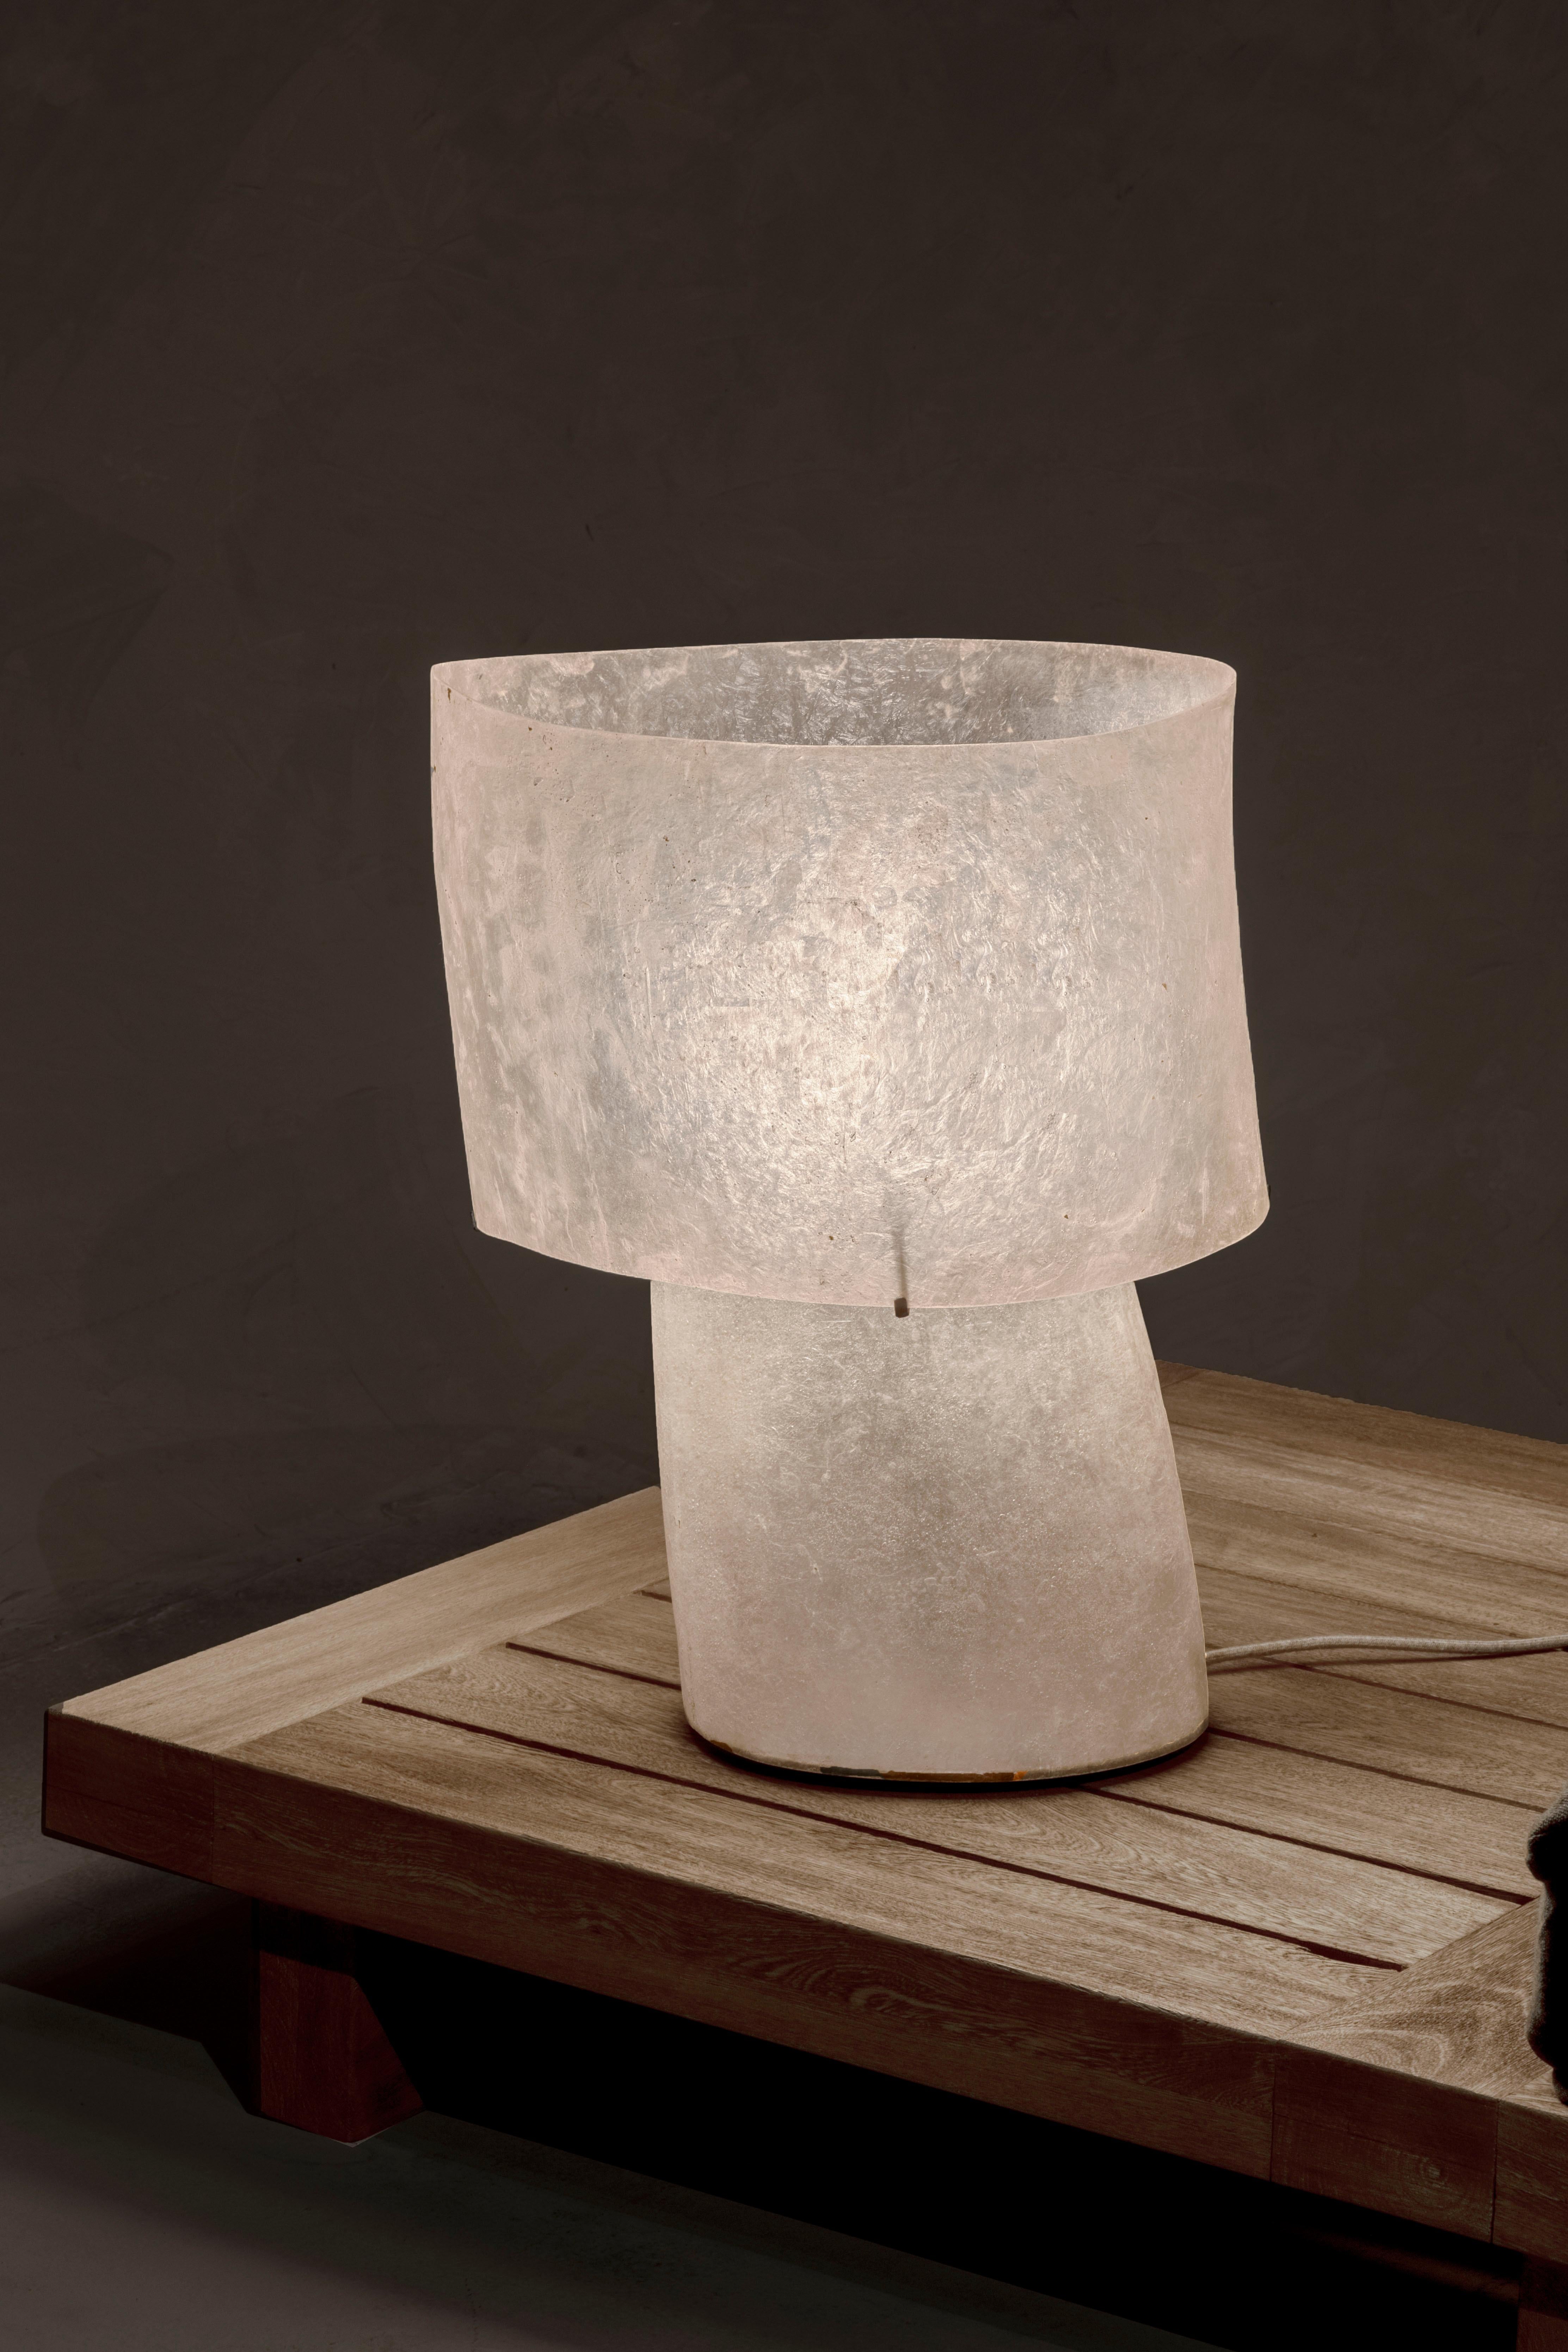 This lamp is one of a two-piece-set. The 